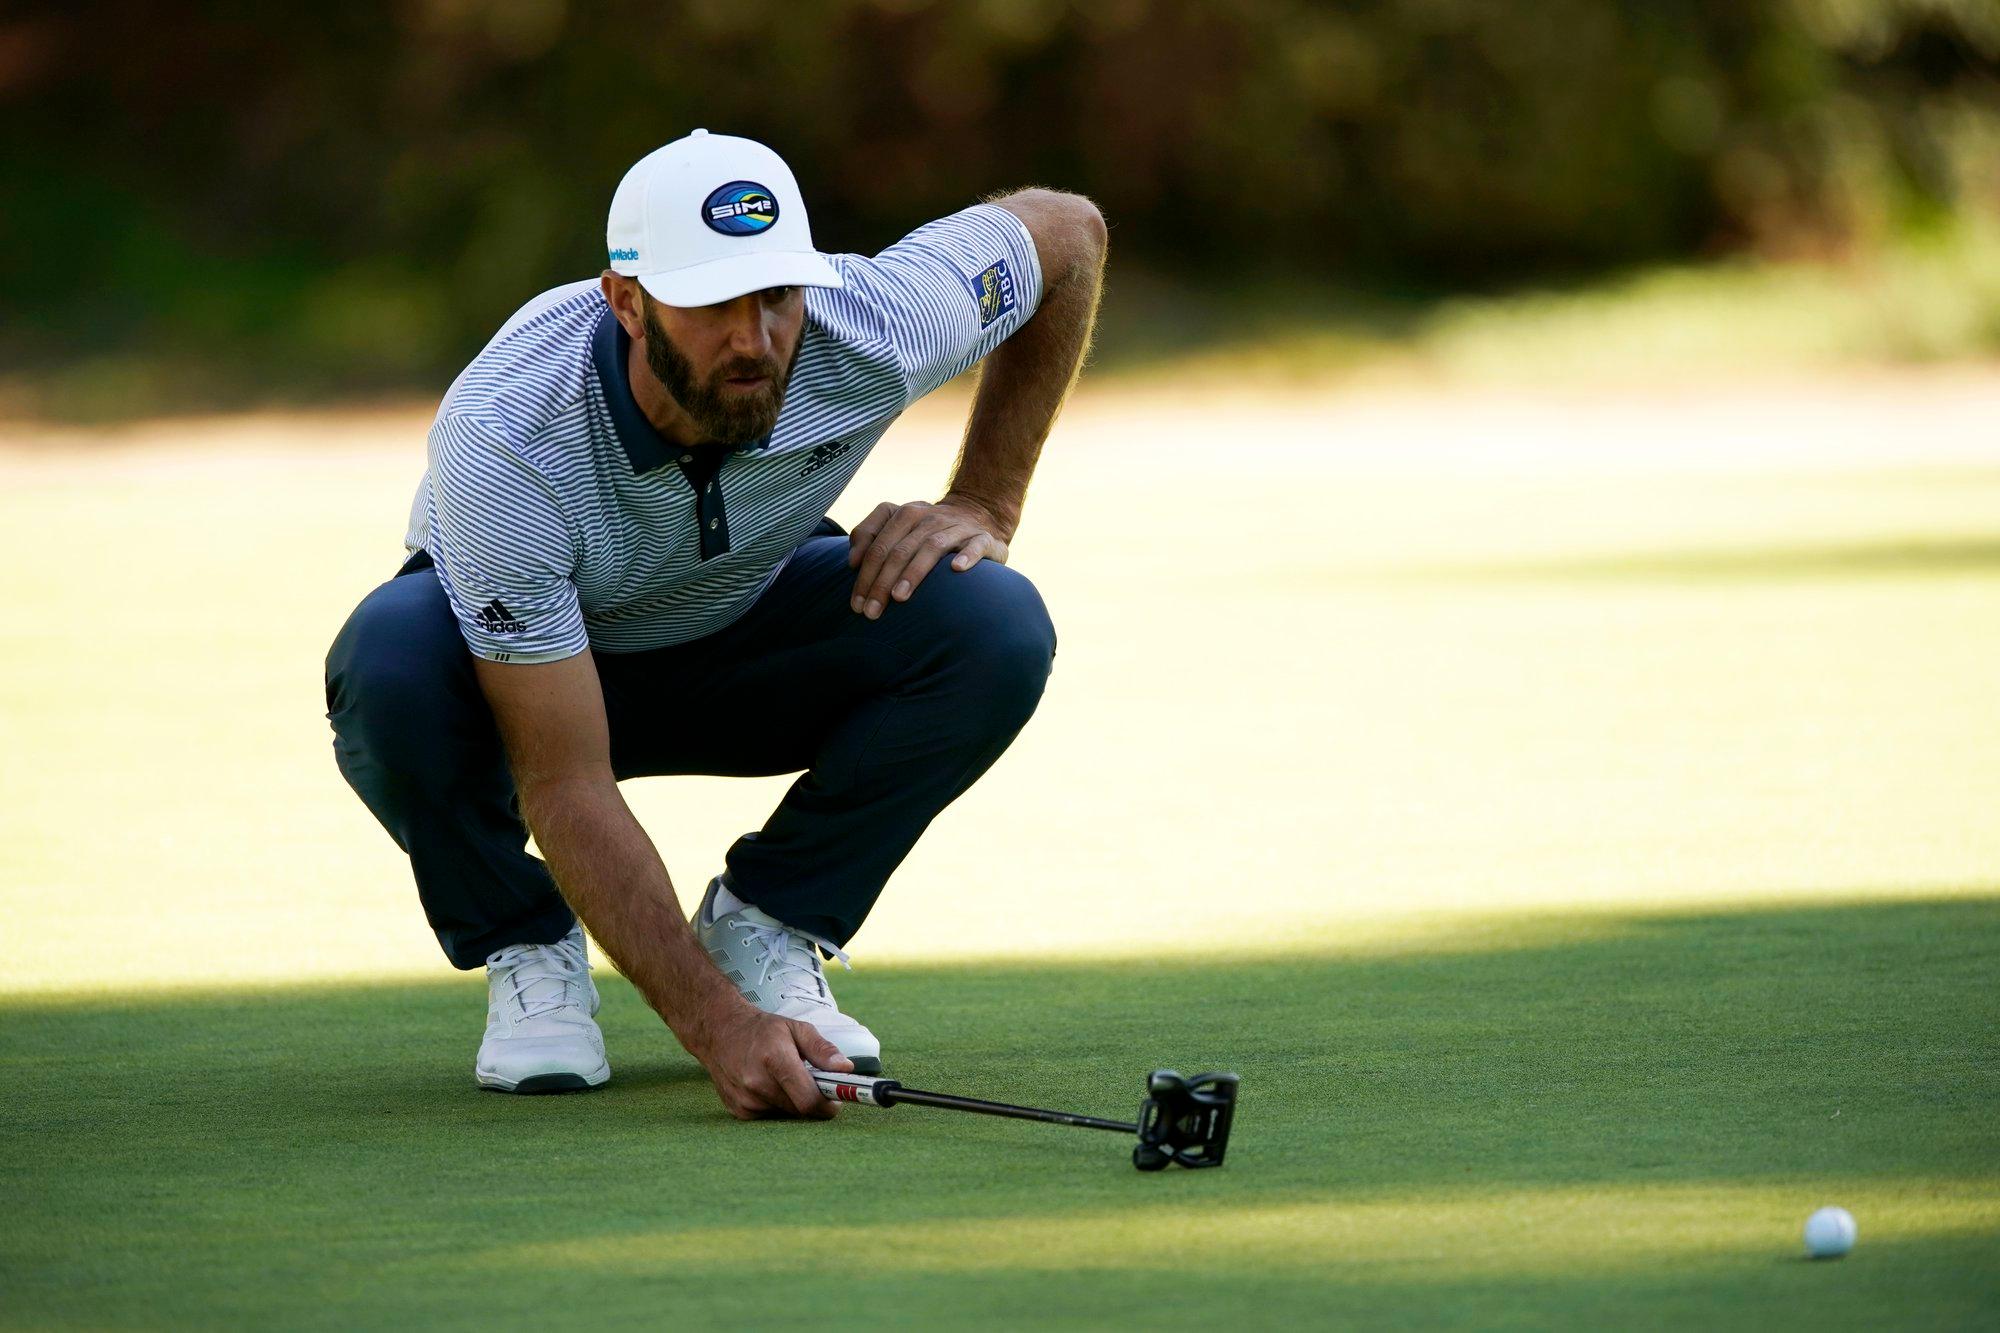 Dustin Johnson lines up his putt on the 13th hole during the final round of the Genesis Invitational golf tournament at Riviera Country Club, Sunday, Feb. 21, 2021, in the Pacific Palisades area of Los Angeles. (AP Photo/Ryan Kang)